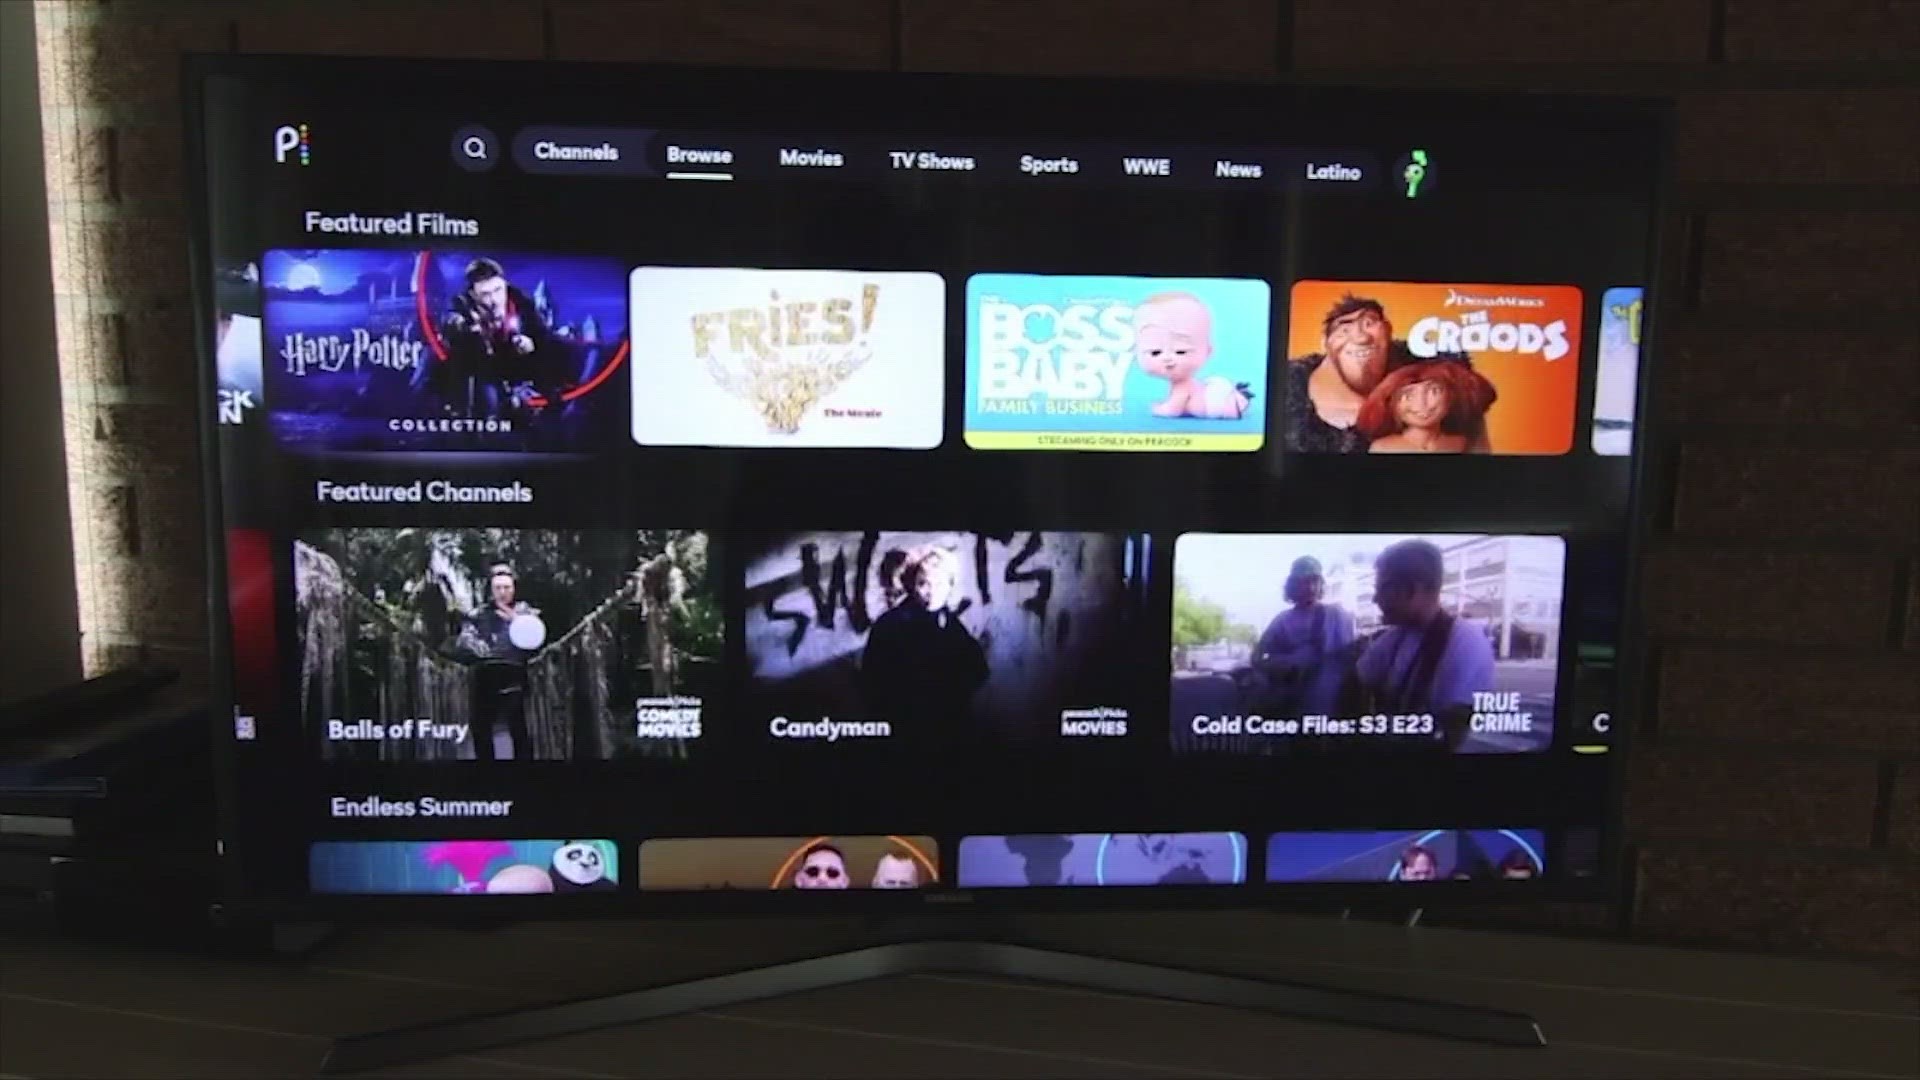 Netflix, Hulu, and other services are no longer offering an almost endless smorgasboard of programming. Now you need to have multiple streamers, or you miss a lot.